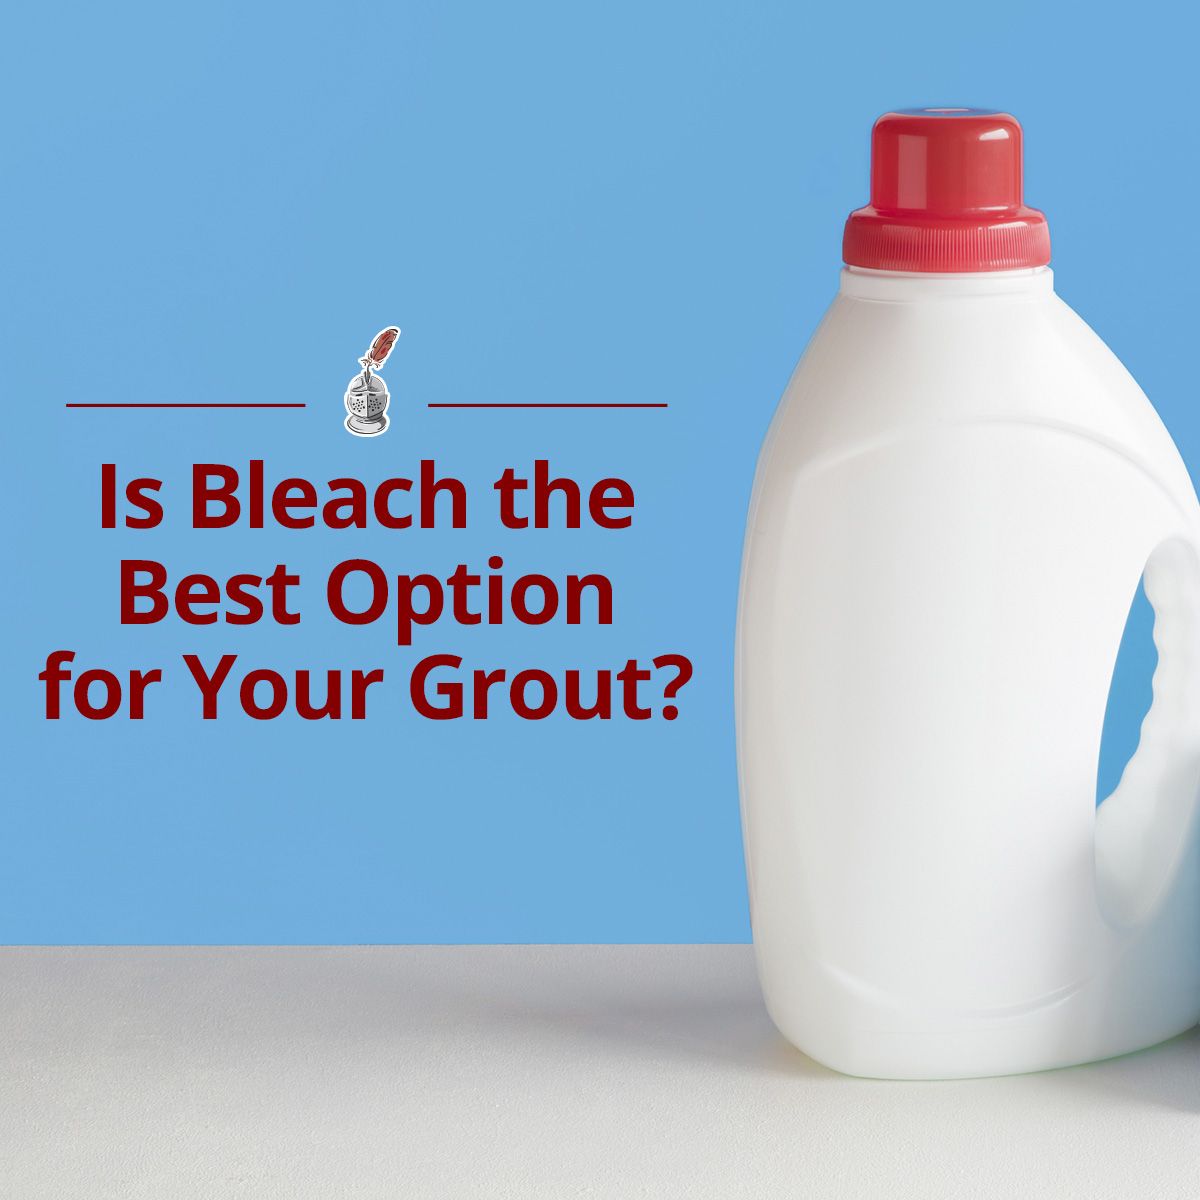 Is Bleach the Best Option for Your Grout?